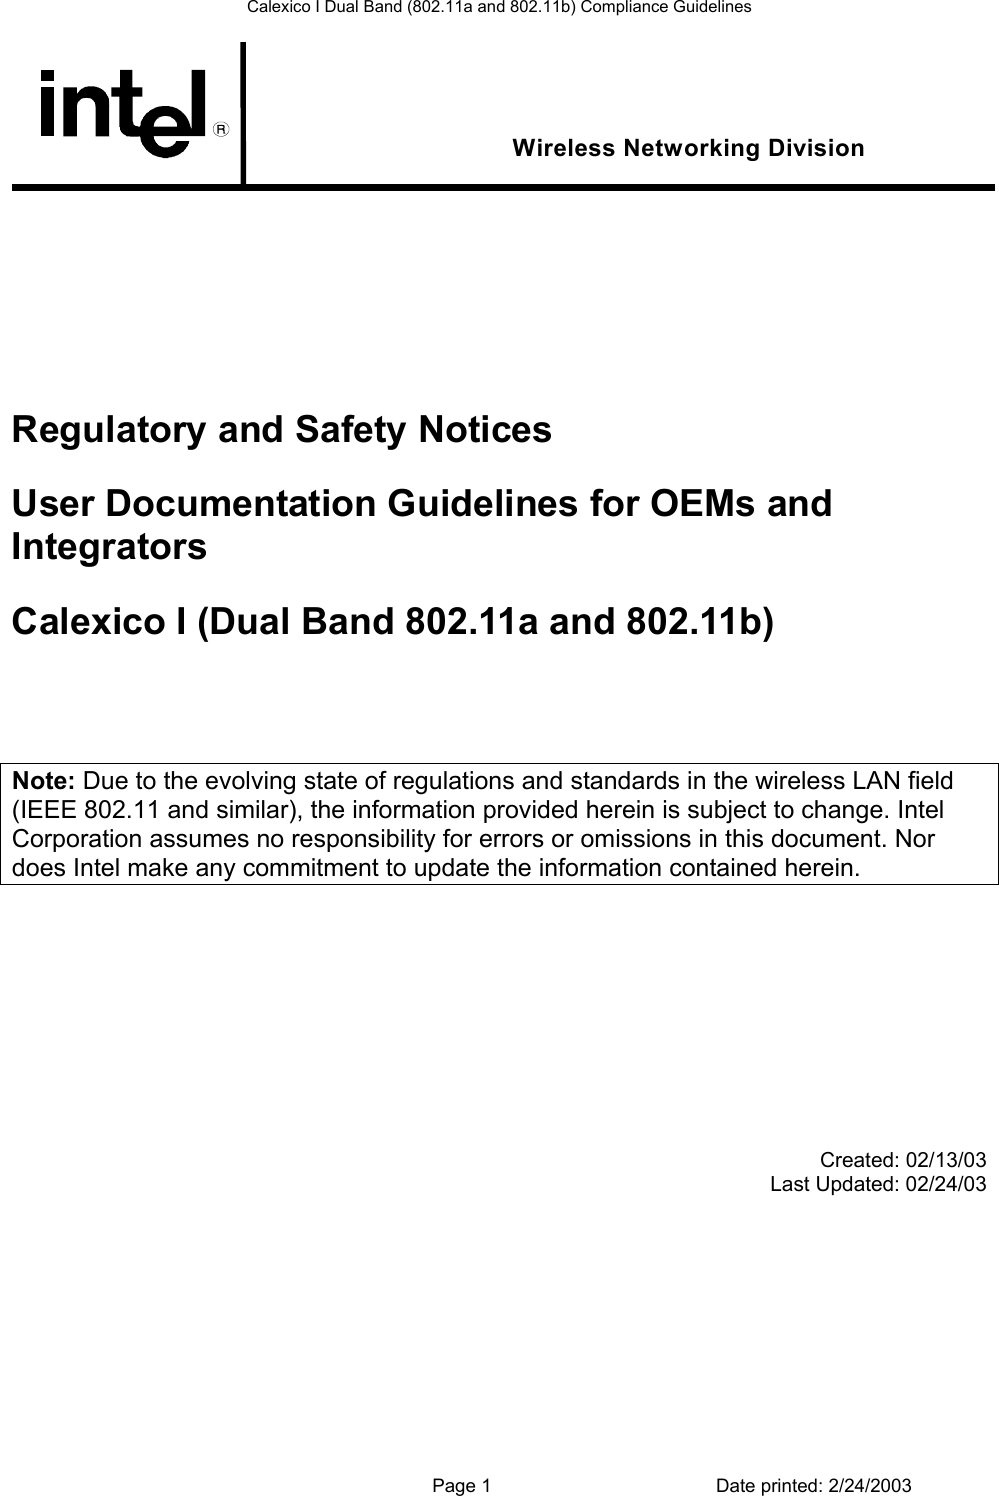 Calexico I Dual Band (802.11a and 802.11b) Compliance Guidelines  Wireless Networking Division         Regulatory and Safety Notices User Documentation Guidelines for OEMs and Integrators Calexico I (Dual Band 802.11a and 802.11b)    Note: Due to the evolving state of regulations and standards in the wireless LAN field (IEEE 802.11 and similar), the information provided herein is subject to change. Intel Corporation assumes no responsibility for errors or omissions in this document. Nor does Intel make any commitment to update the information contained herein.             Created: 02/13/03 Last Updated: 02/24/03             Page 1  Date printed: 2/24/2003 